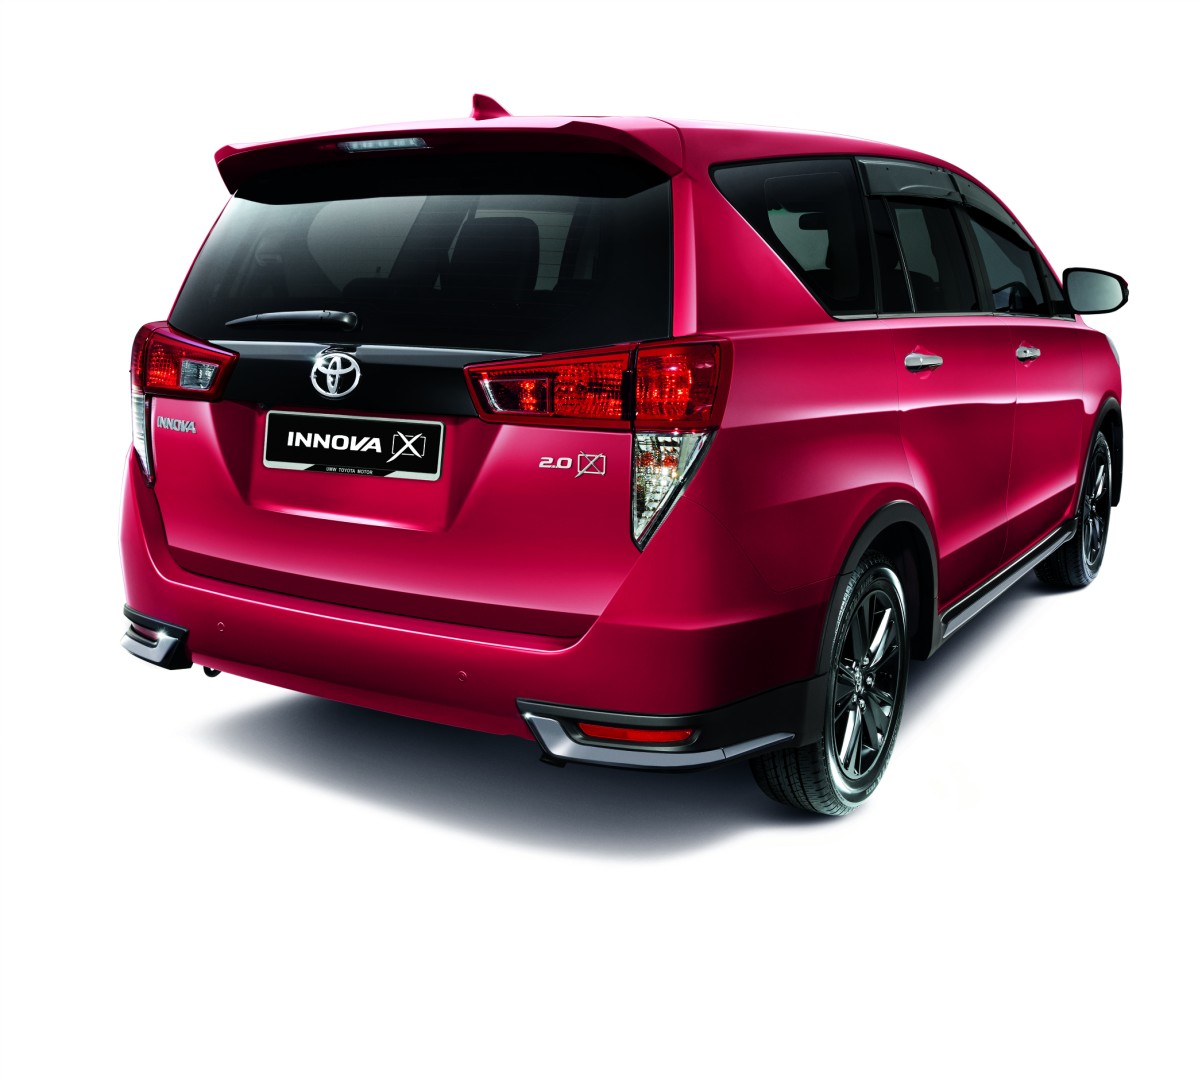 Motoring-Malaysia: THE NEW TOYOTA INNOVA 2.0X, ADDITIONAL FORTUNER 2.4 ...